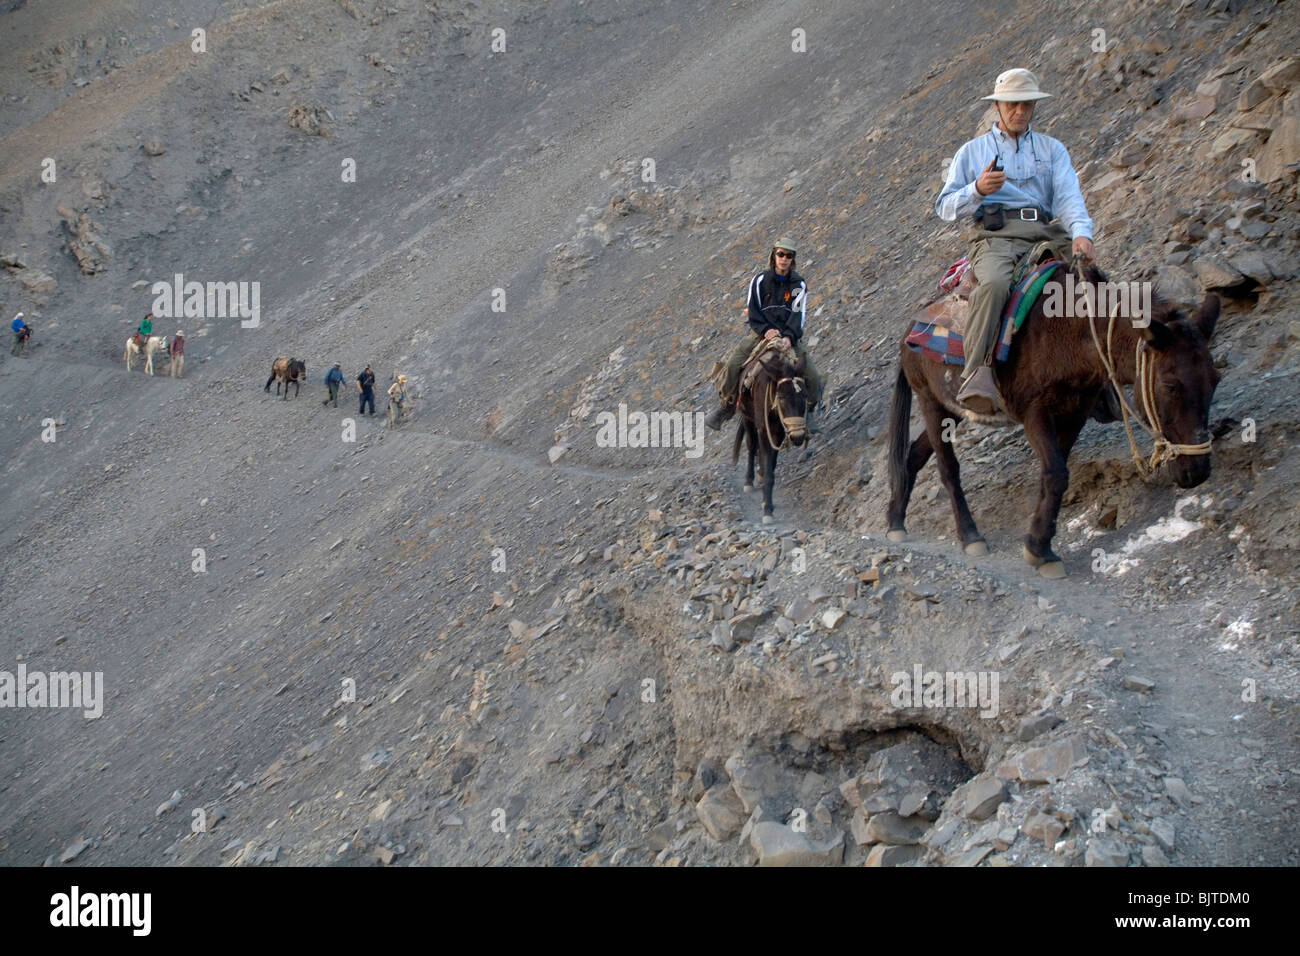 Expedition rides mules down the Colca Canyon Valley, the deepest canyon on Earth. Peru, South America Stock Photo